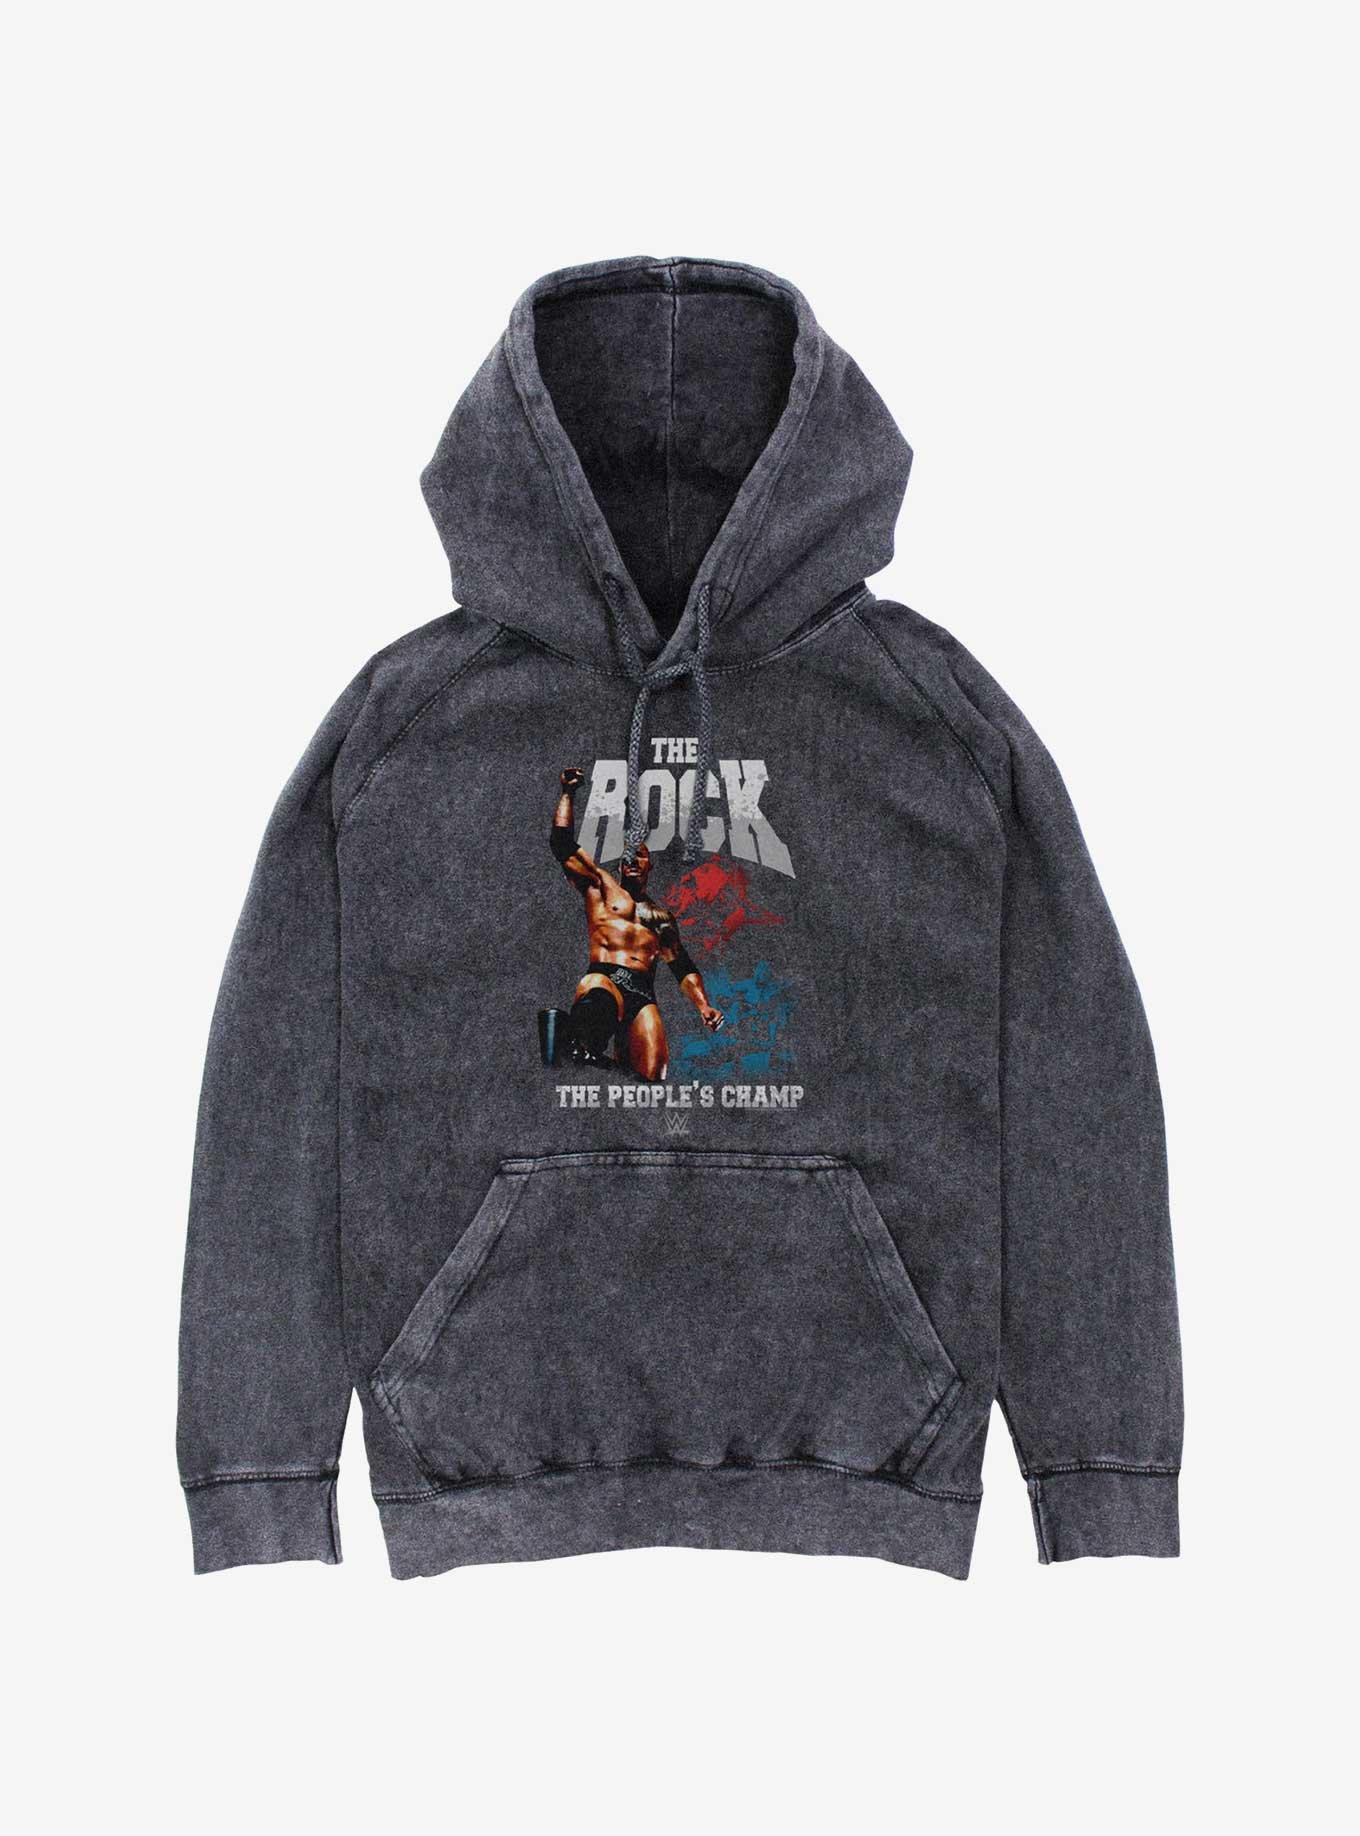 WWE The Rock The People's Champ Mineral Wash Hoodie, BLACK, hi-res